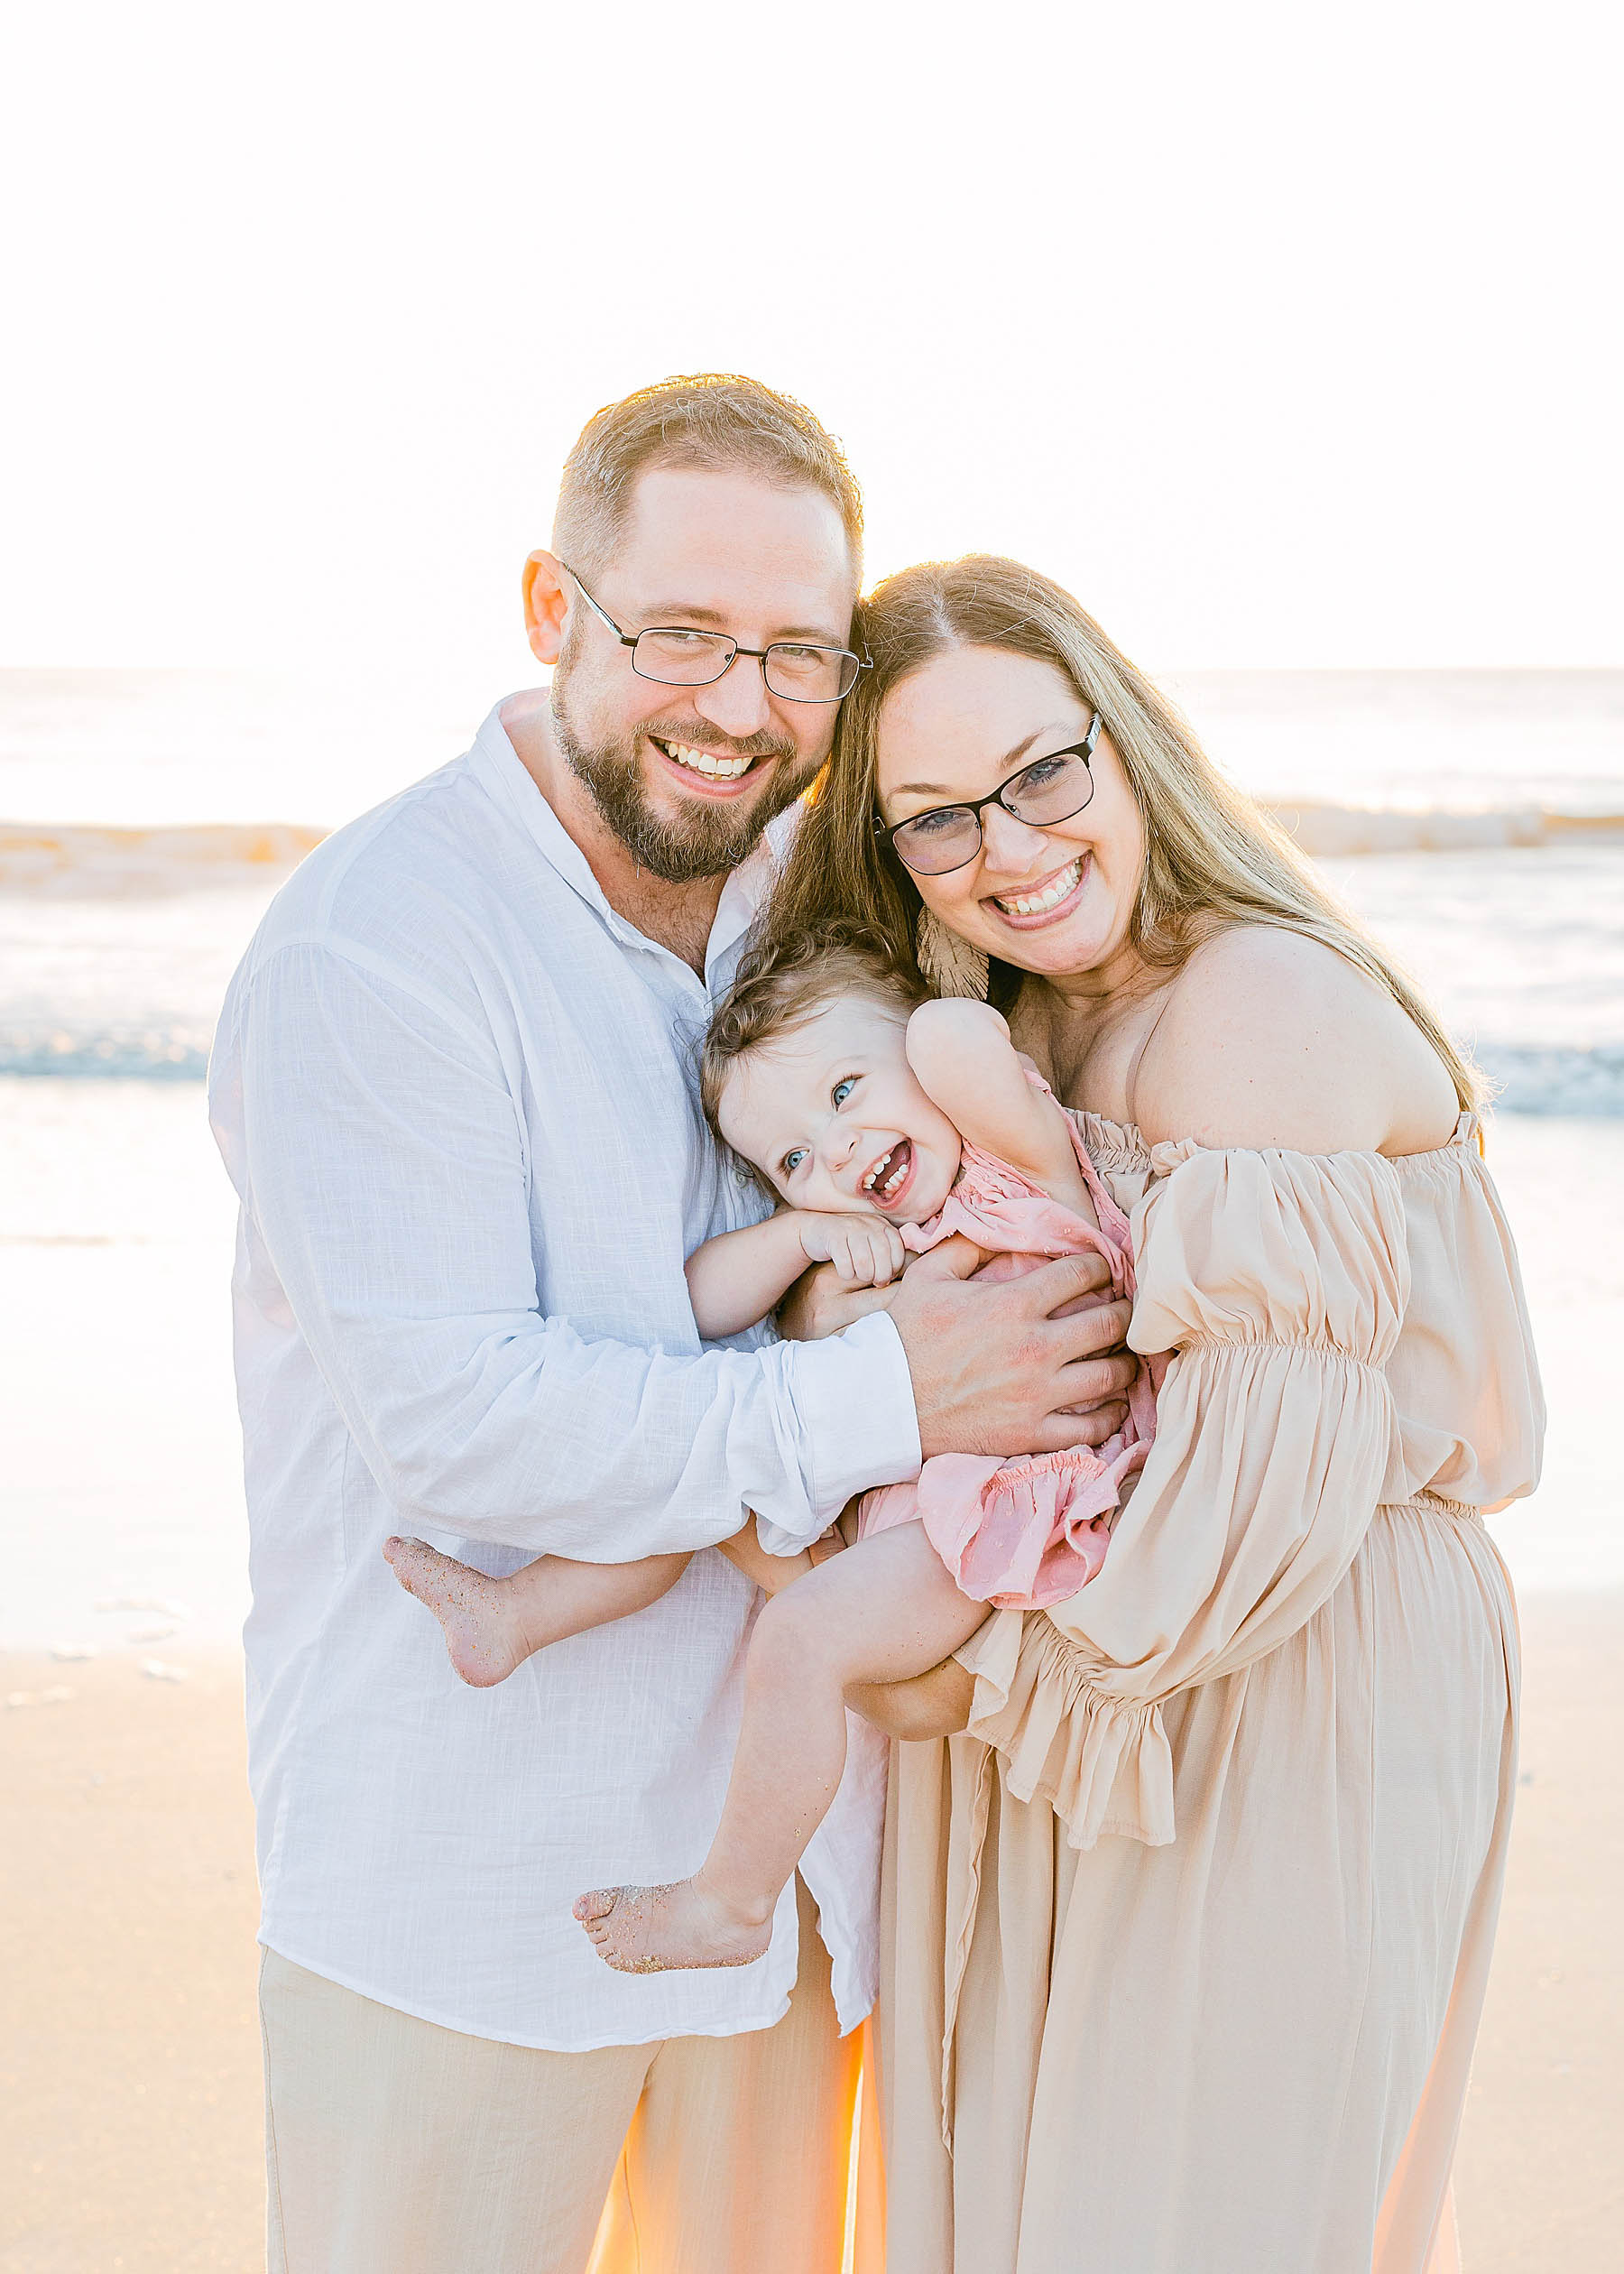 family holding baby girl on the beach at sunrise smiling